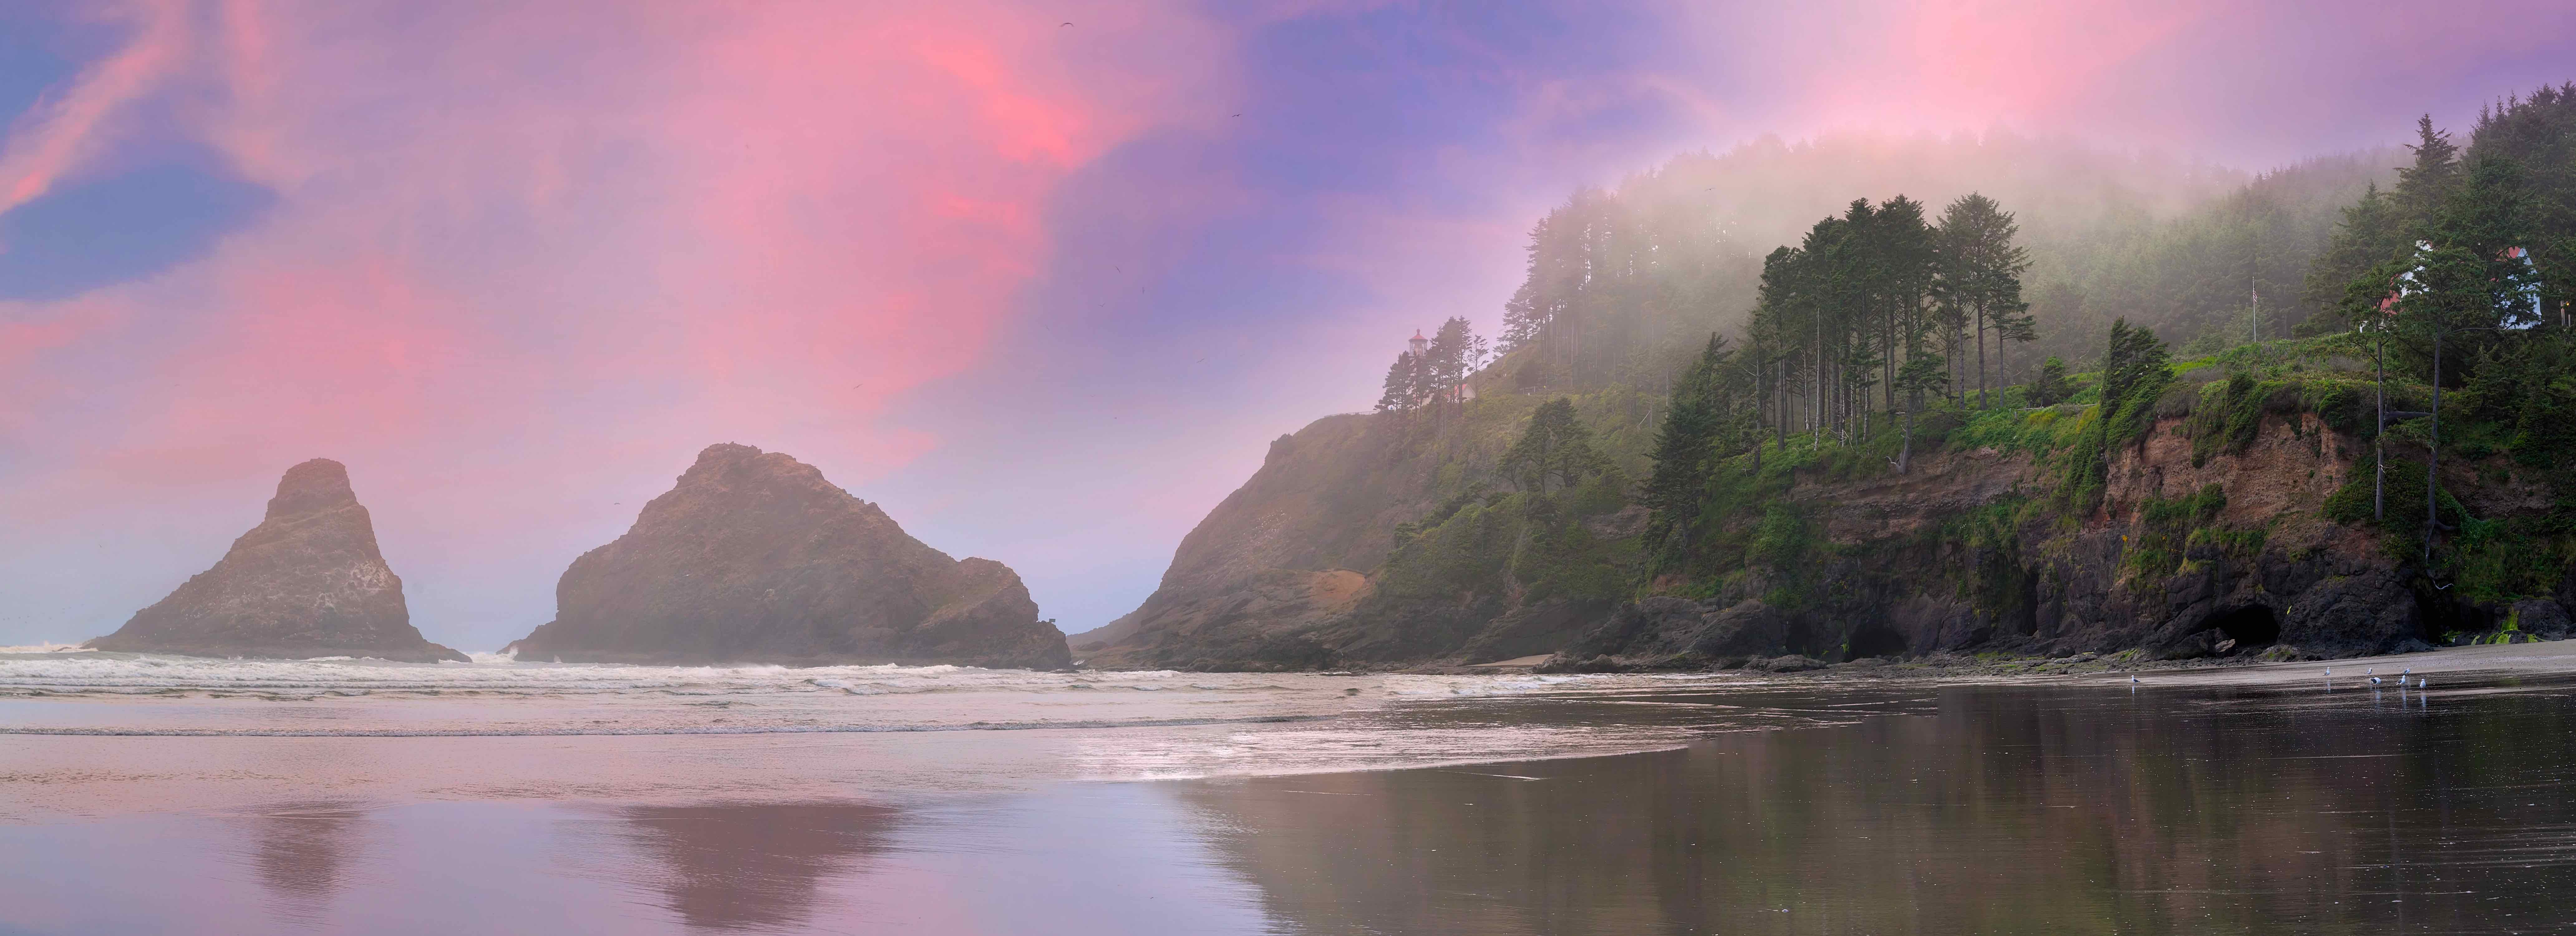 Heceta Head Lighthouse Devils Elbow State Park and Beach at Oregon Coast on a Foggy Sunset Day Panorama